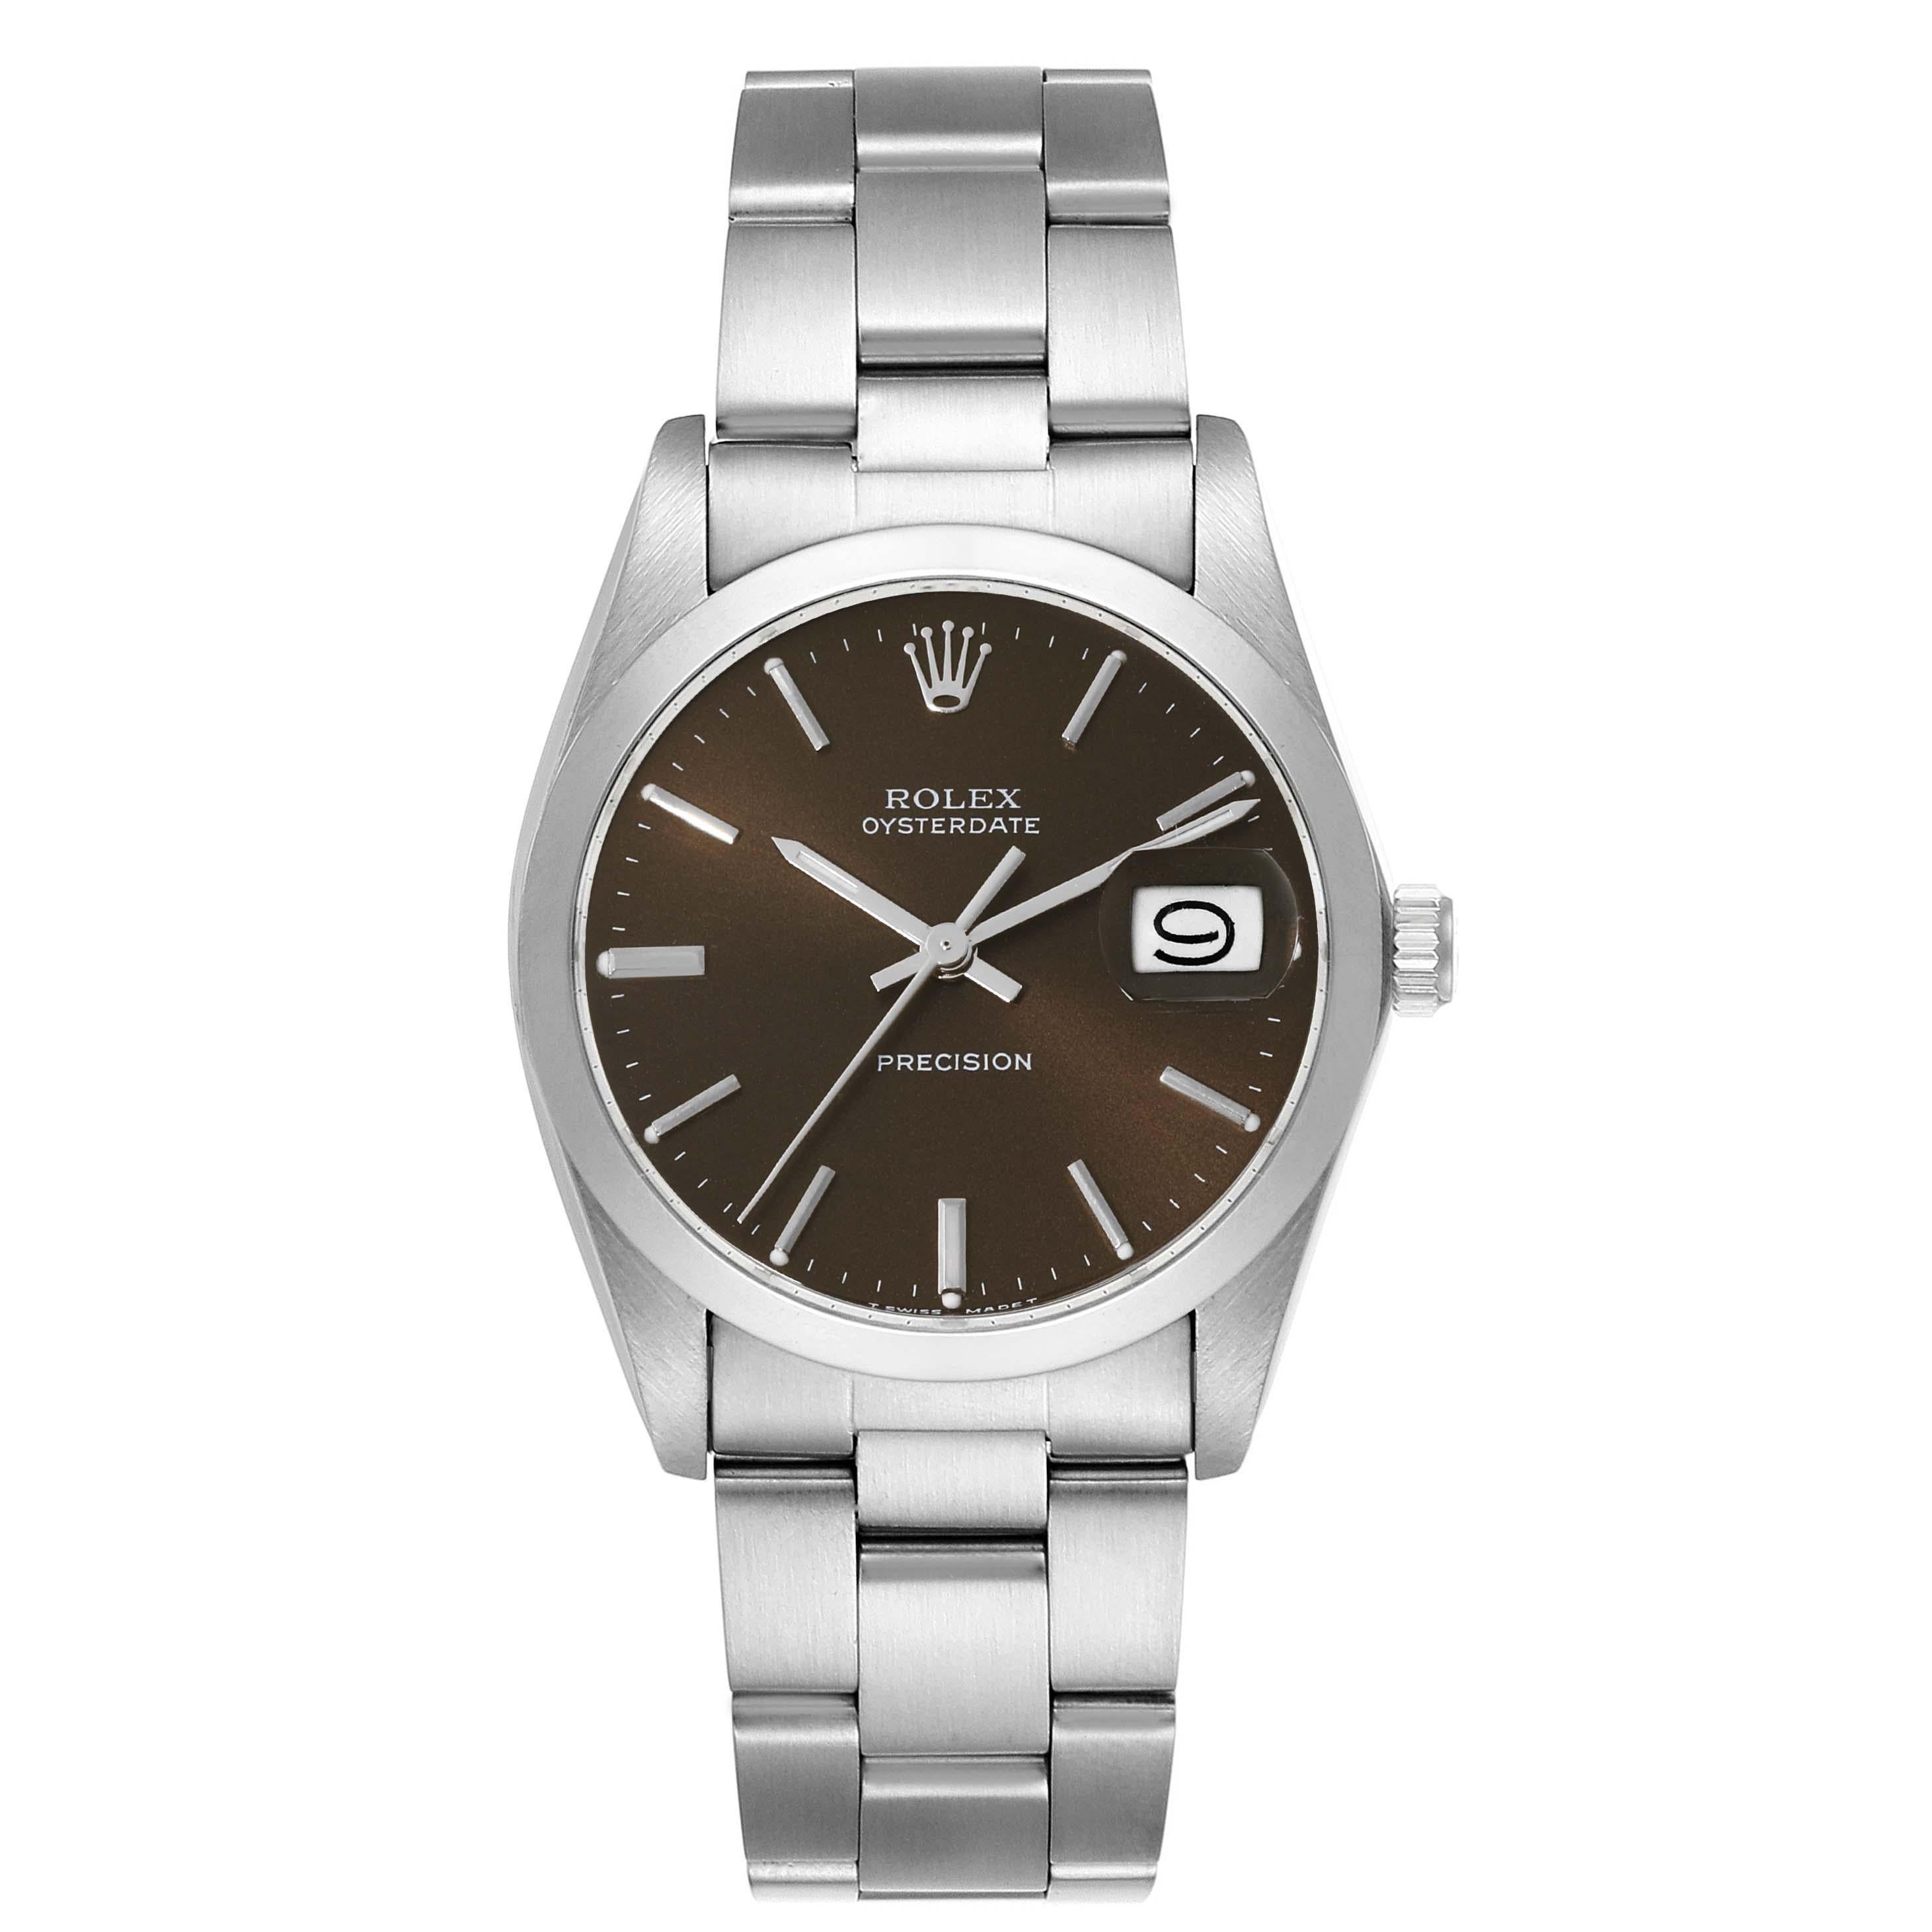 Rolex OysterDate Precision Brown Dial Steel Vintage Mens Watch 6694. Manual-winding movement. Stainless steel oyster case 35.0 mm in diameter. Rolex logo on the crown. Stainless steel smooth bezel. Acrylic crystal with cyclops magnifier. Brown dial